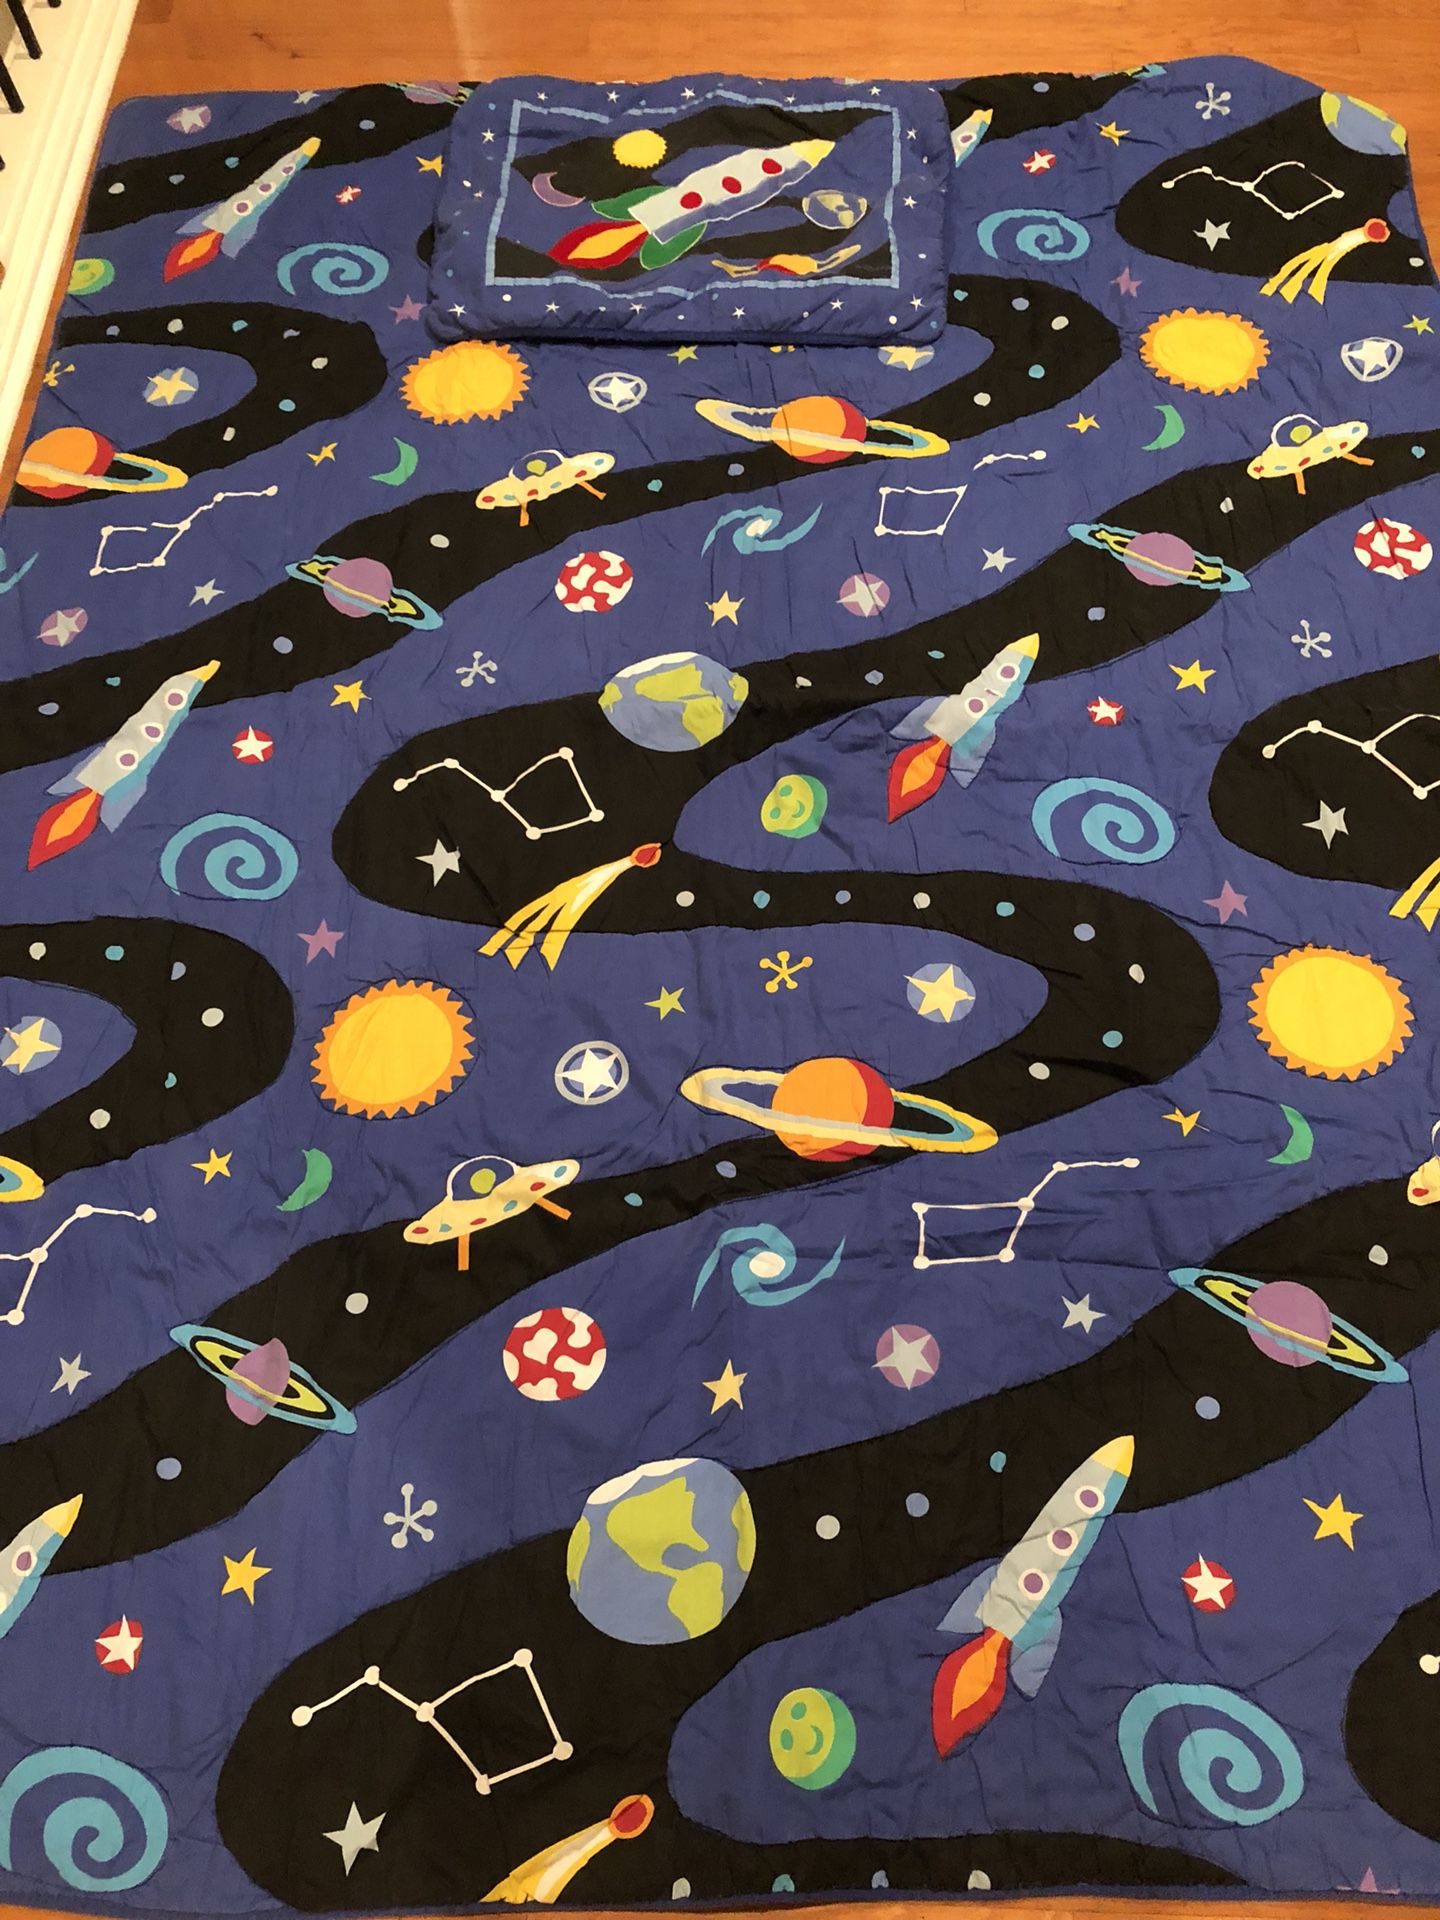 Space Twin Comforter - Planets - Solar System - I have 2 sets. Perfect for Bunk Beds